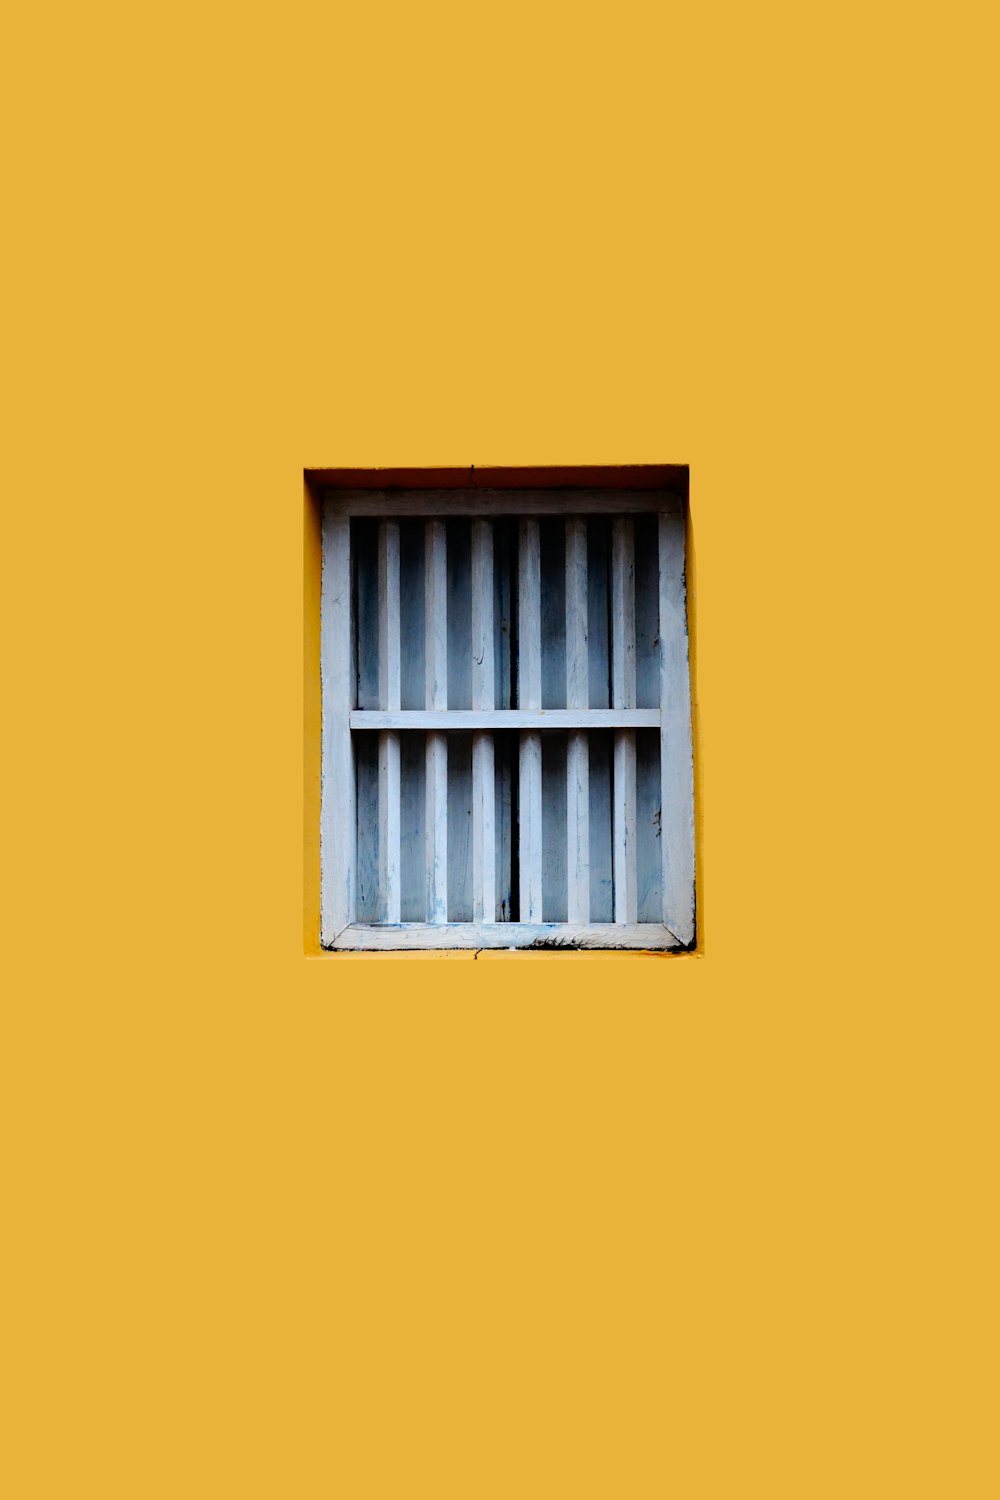 a window with bars on it